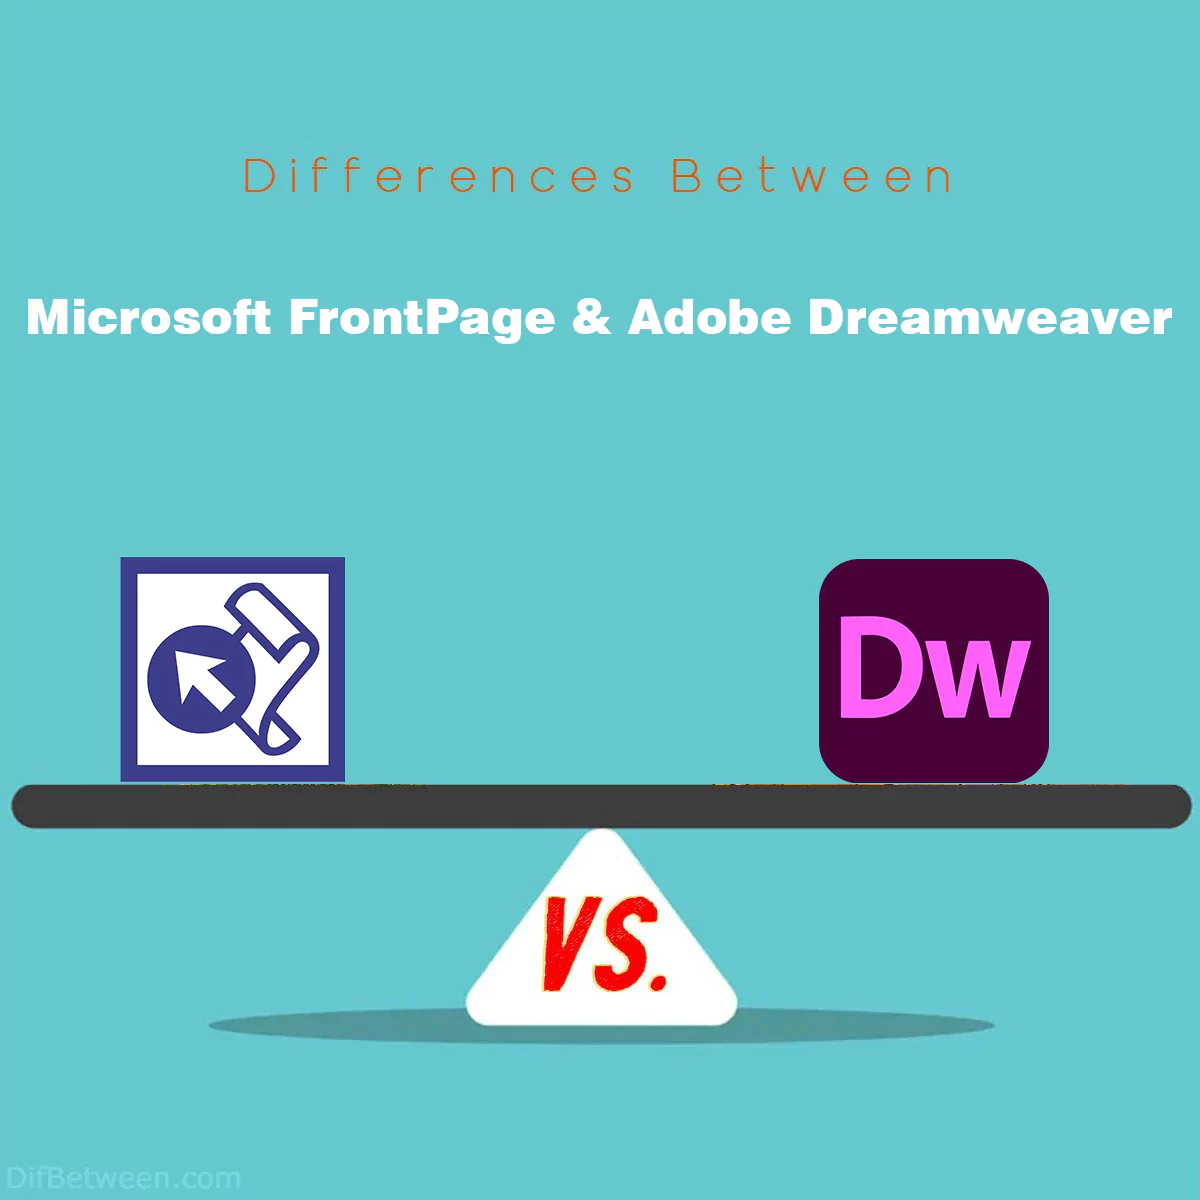 Differences Between Microsoft FrontPage and Adobe Dreamweaver